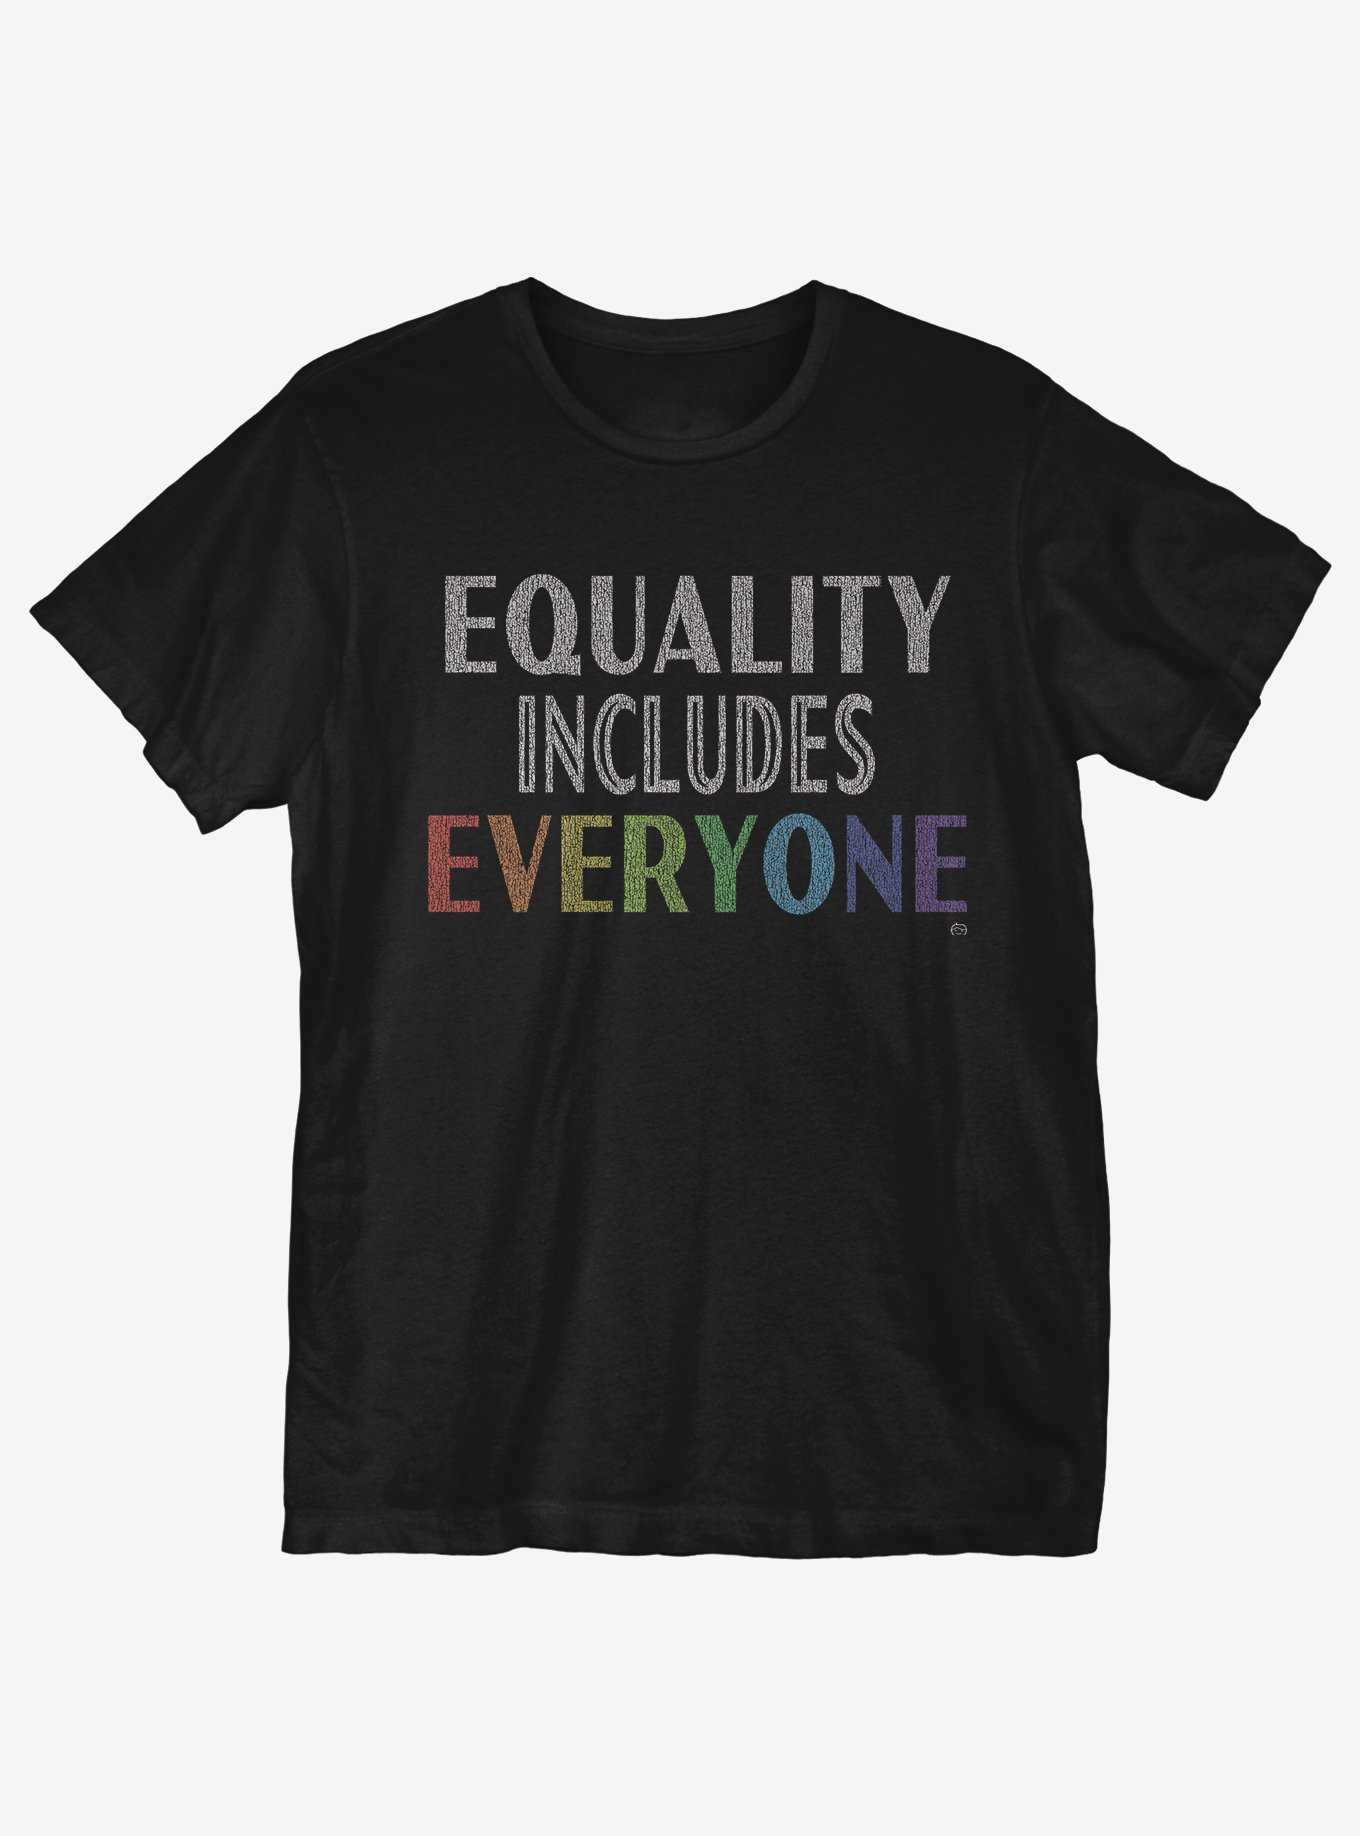 Equality Includes T-Shirt, , hi-res